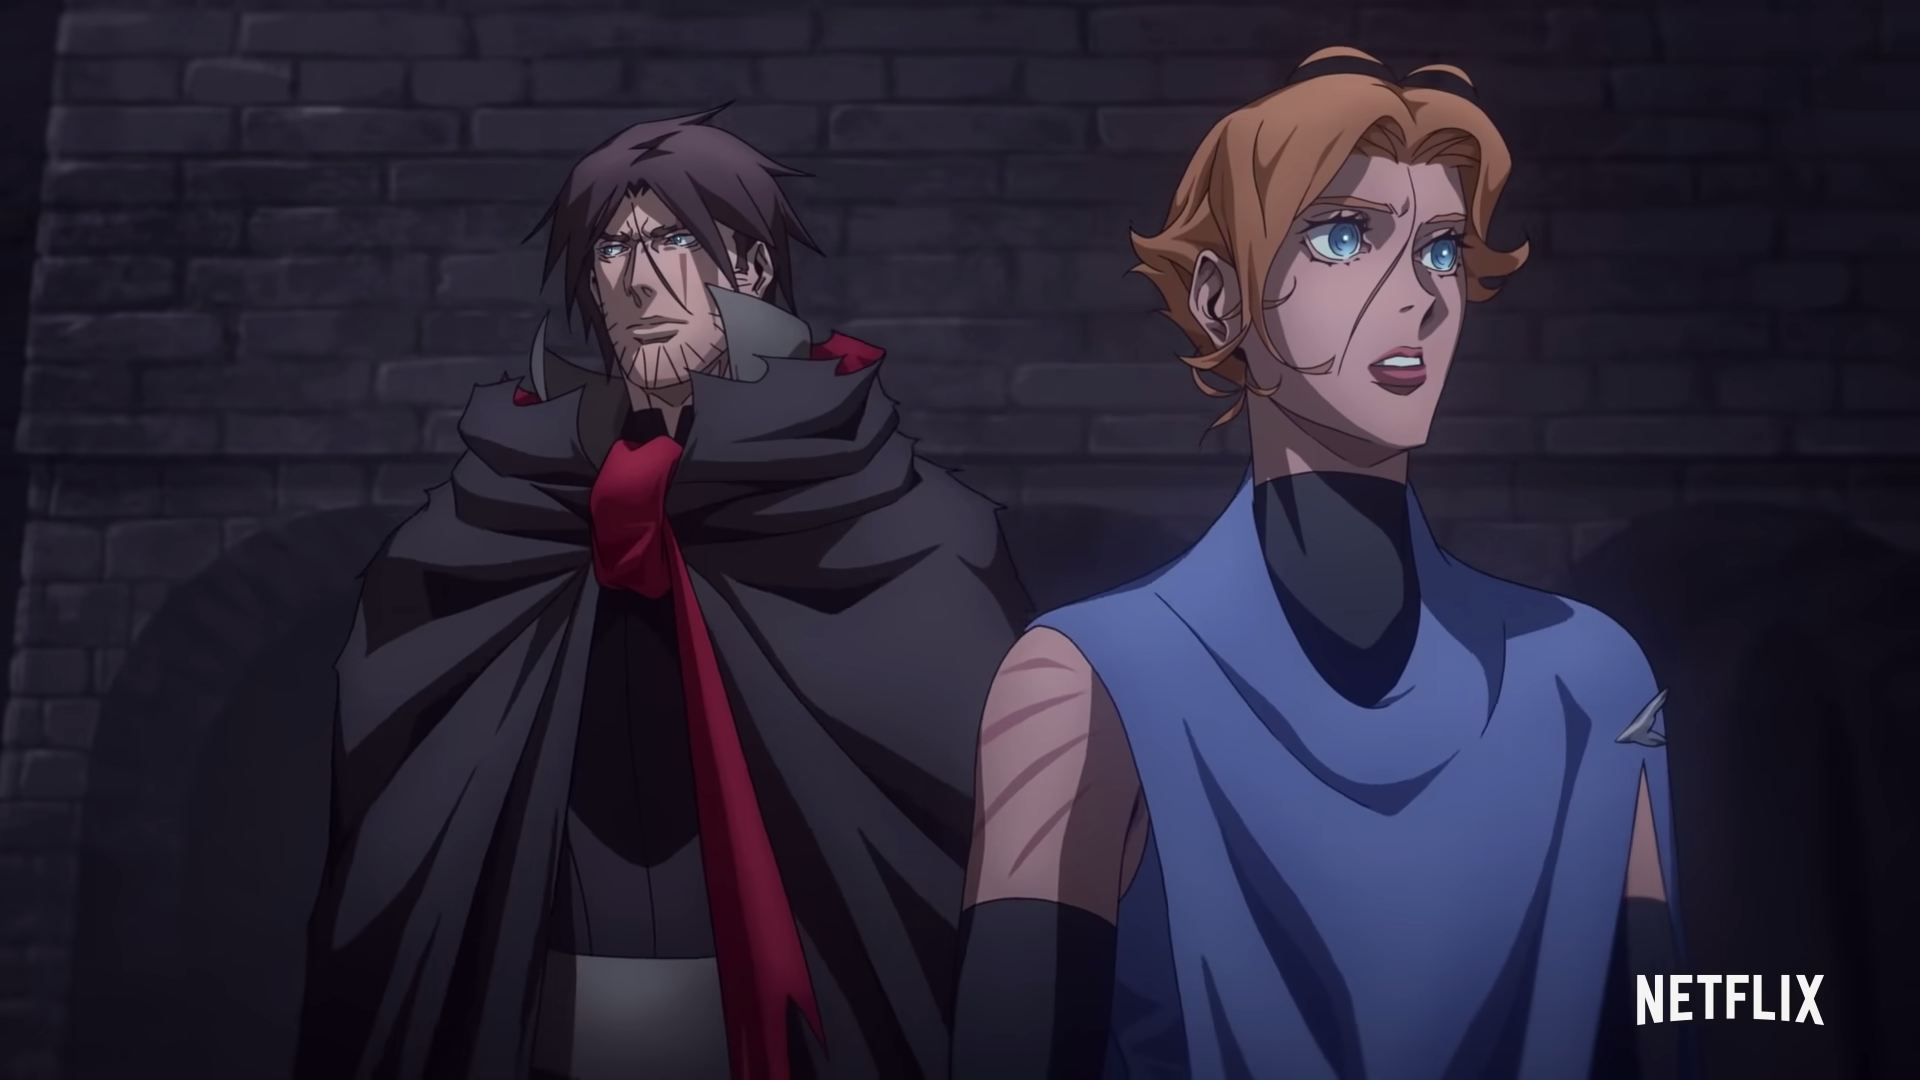 Netflix Castlevania Season 4 Official Trailer, Coming to Netflix in May 2021